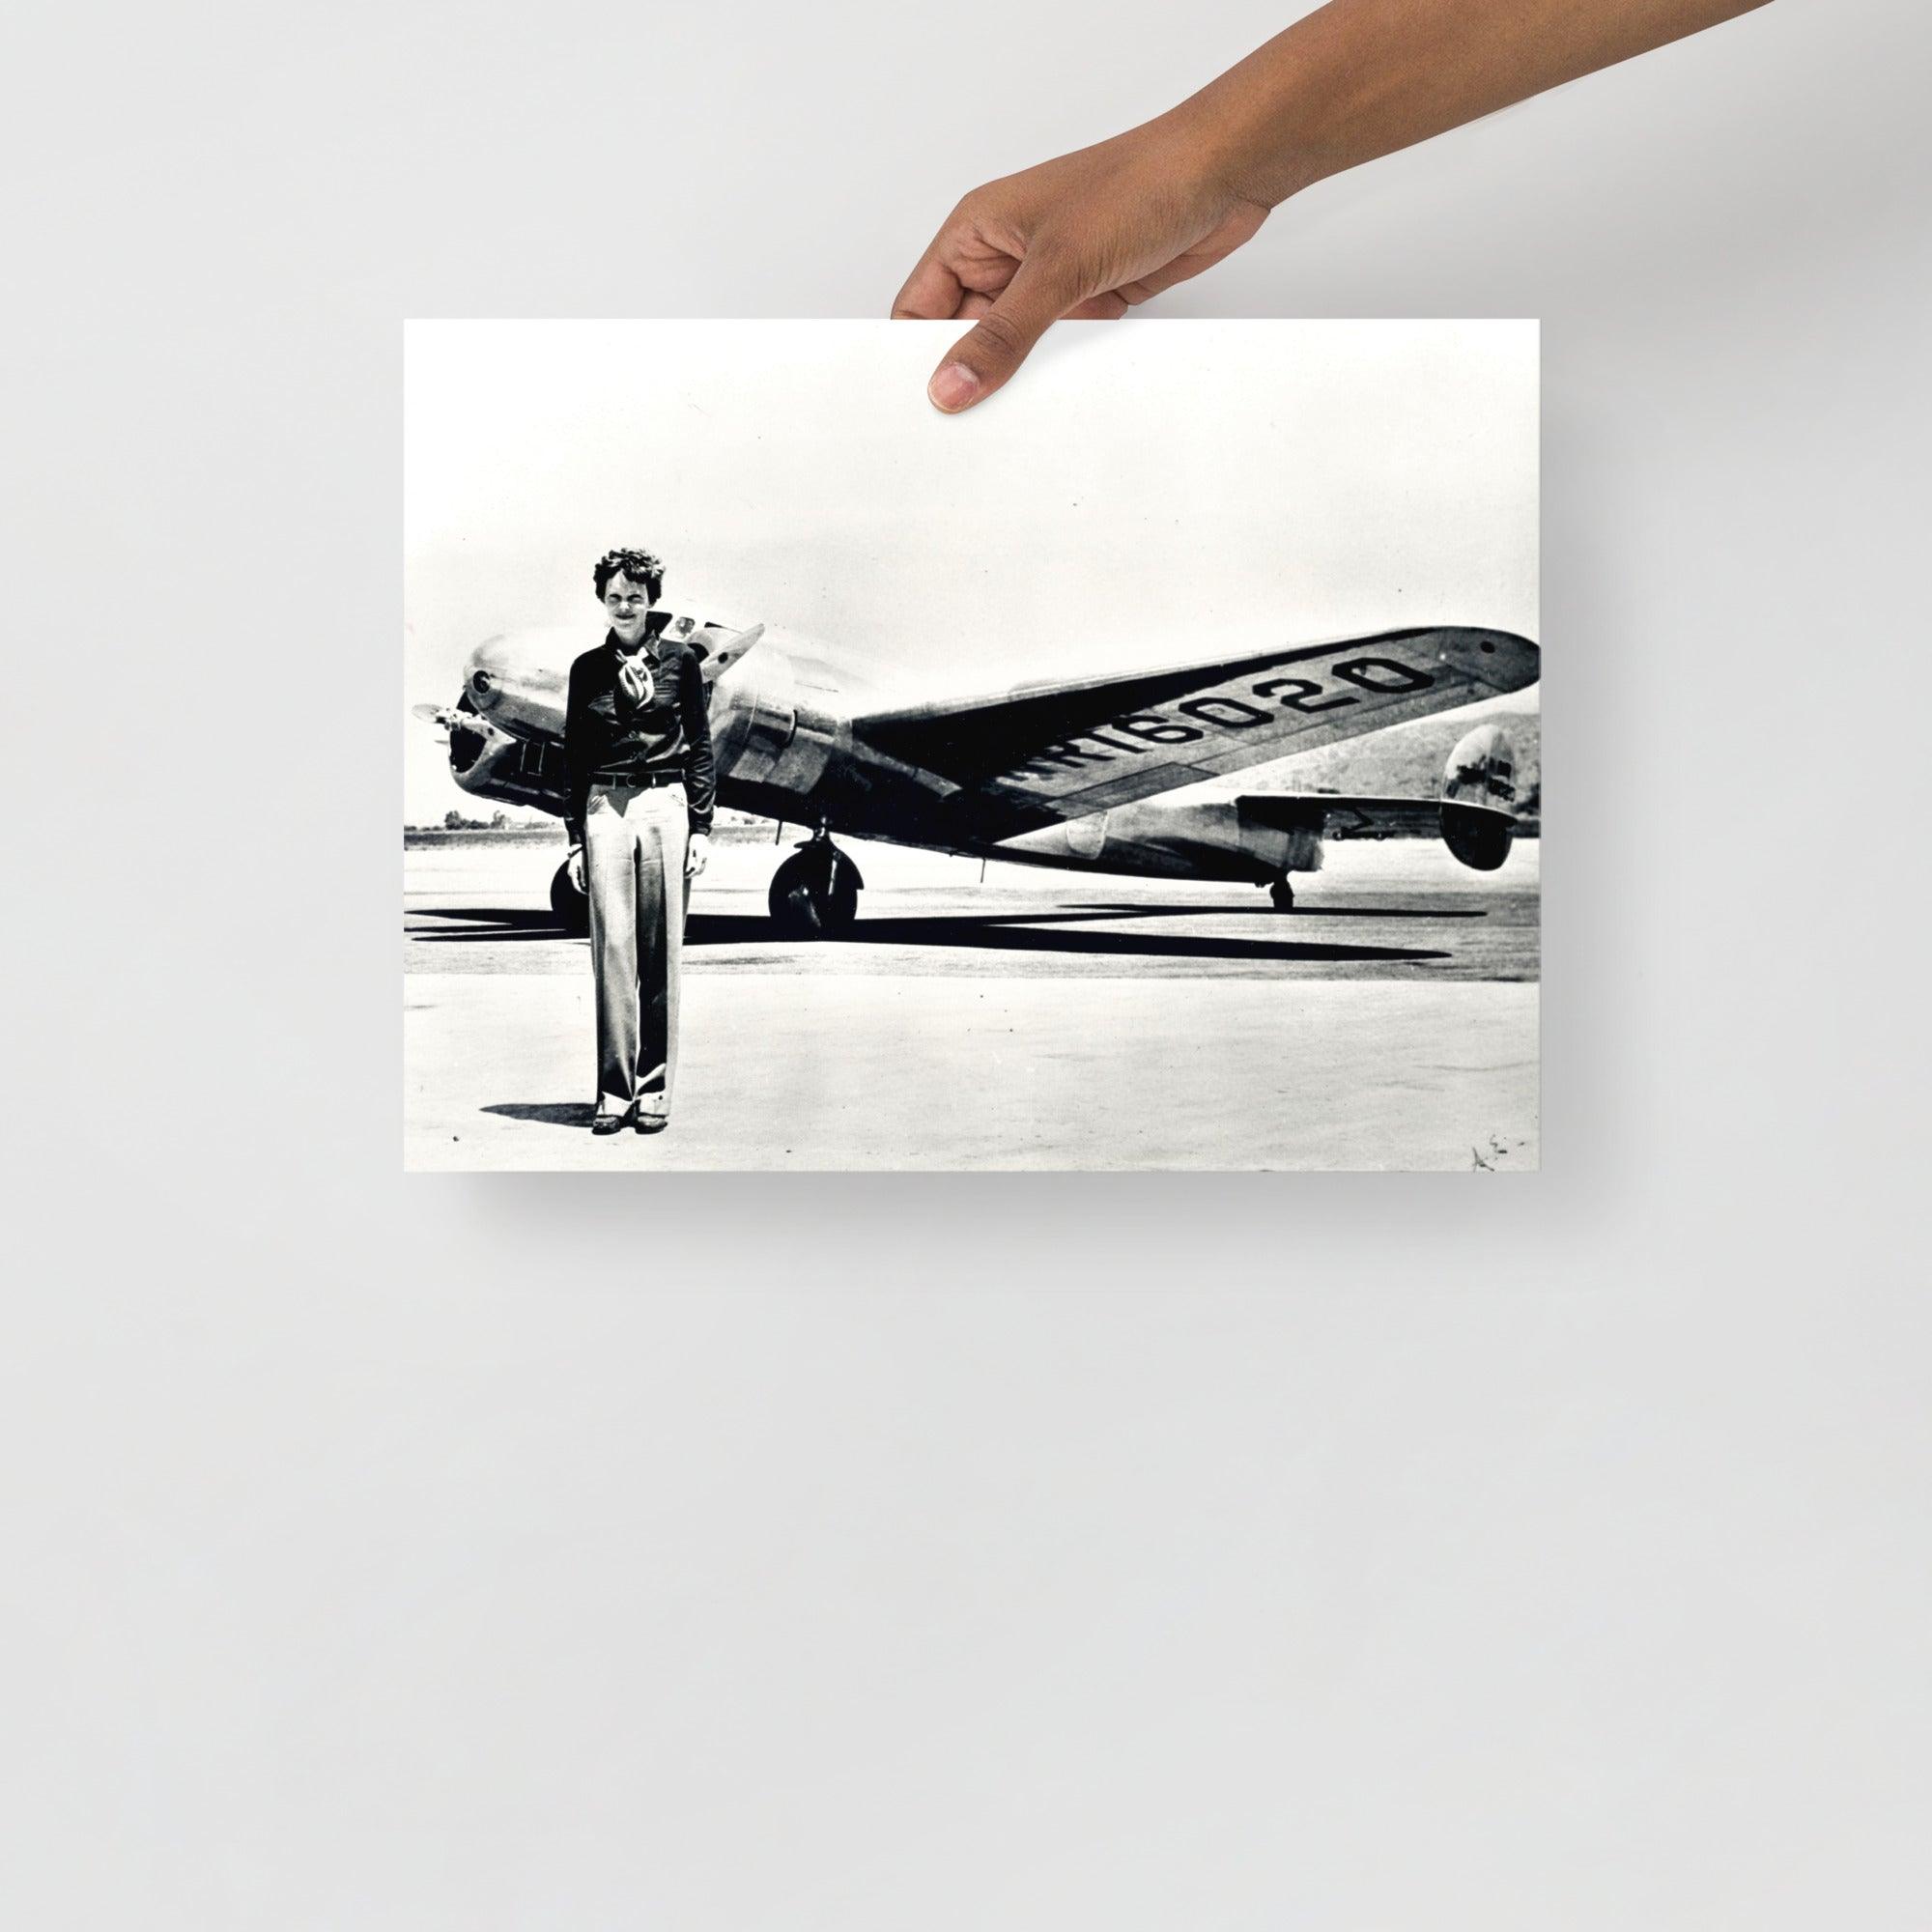 An Amelia Earhart standing in front of the Lockheed Electra on a plain backdrop in size 12x16”.